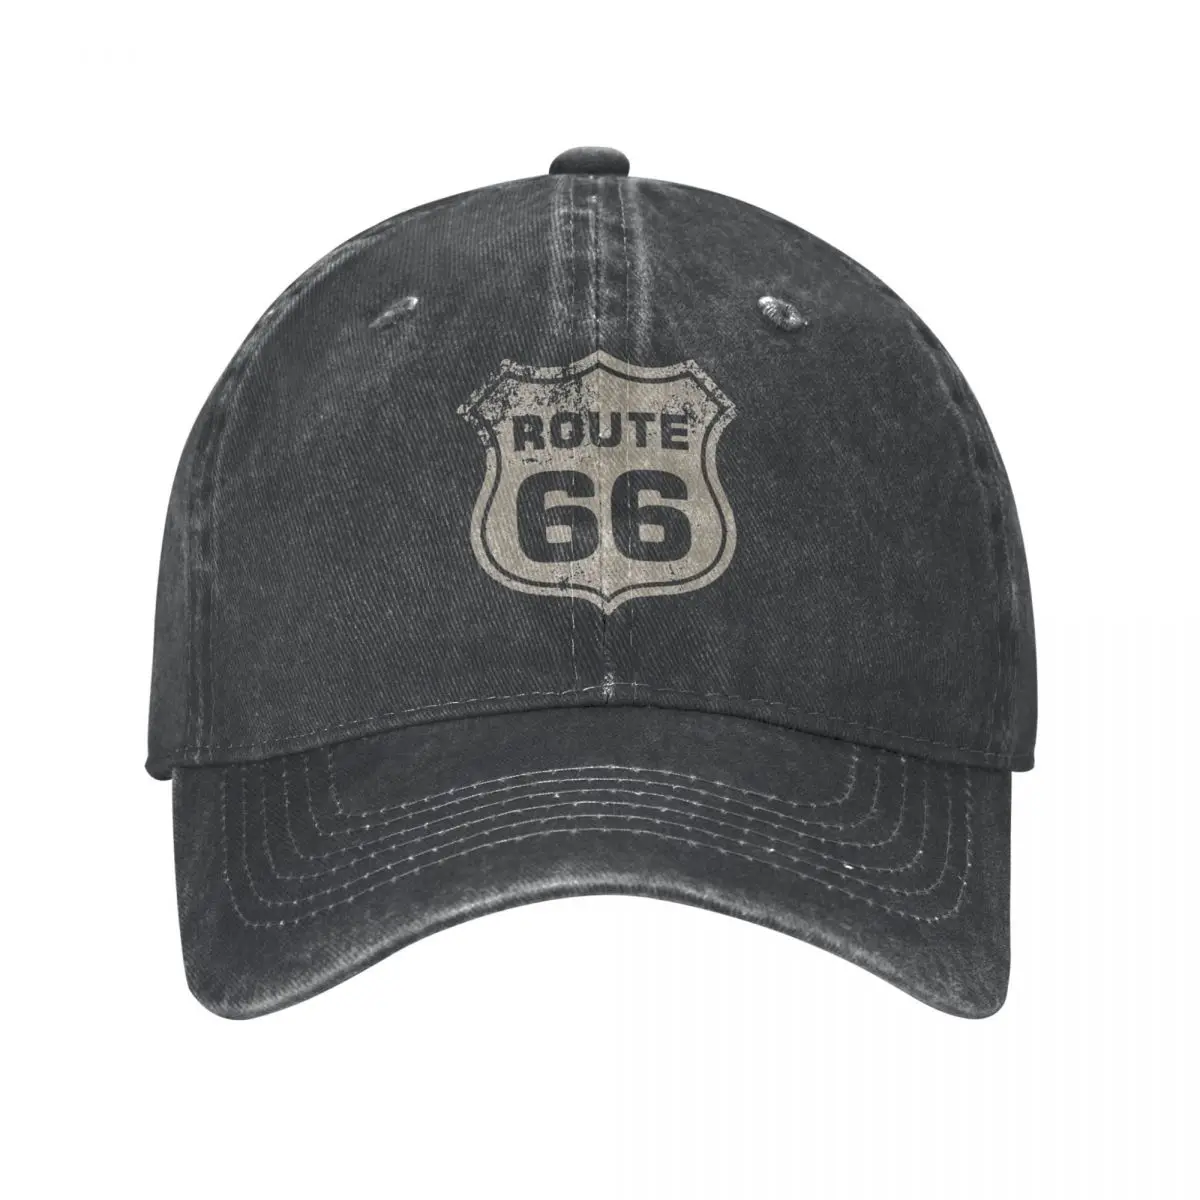 

Route 66 Retro Sign Unisex Baseball Caps Distressed Washed Hats Cap Vintage Outdoor All Seasons Travel Gift Snapback Cap